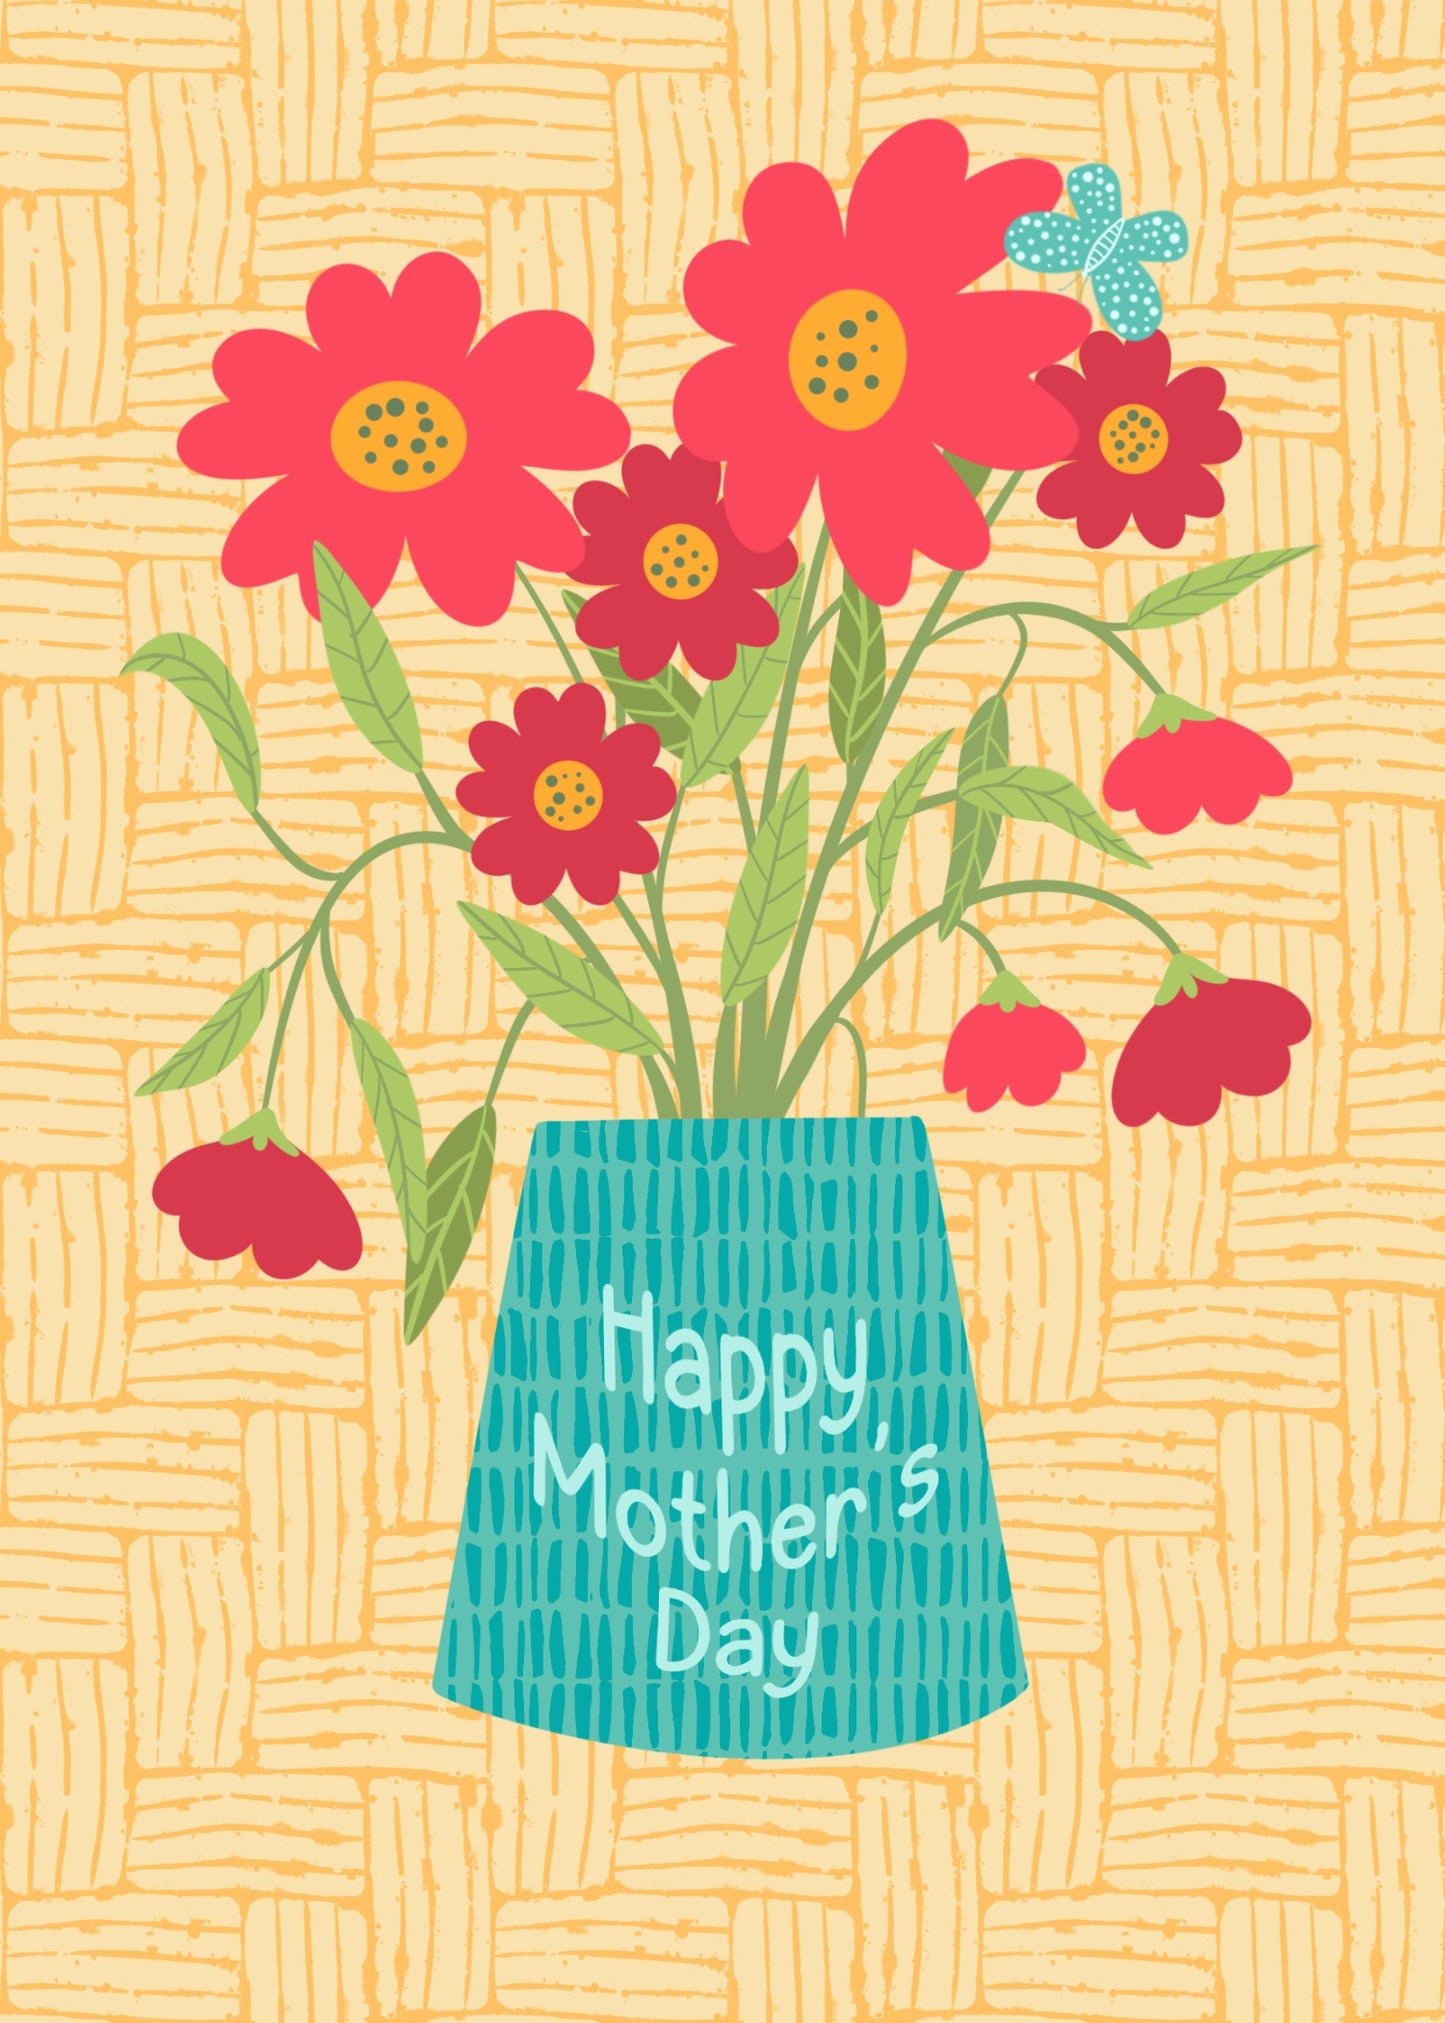 Happy Mother’s Day Mother’s Day Card - Simple Vase of Flowers Design with Mom in Large Script | Instant Digital Download